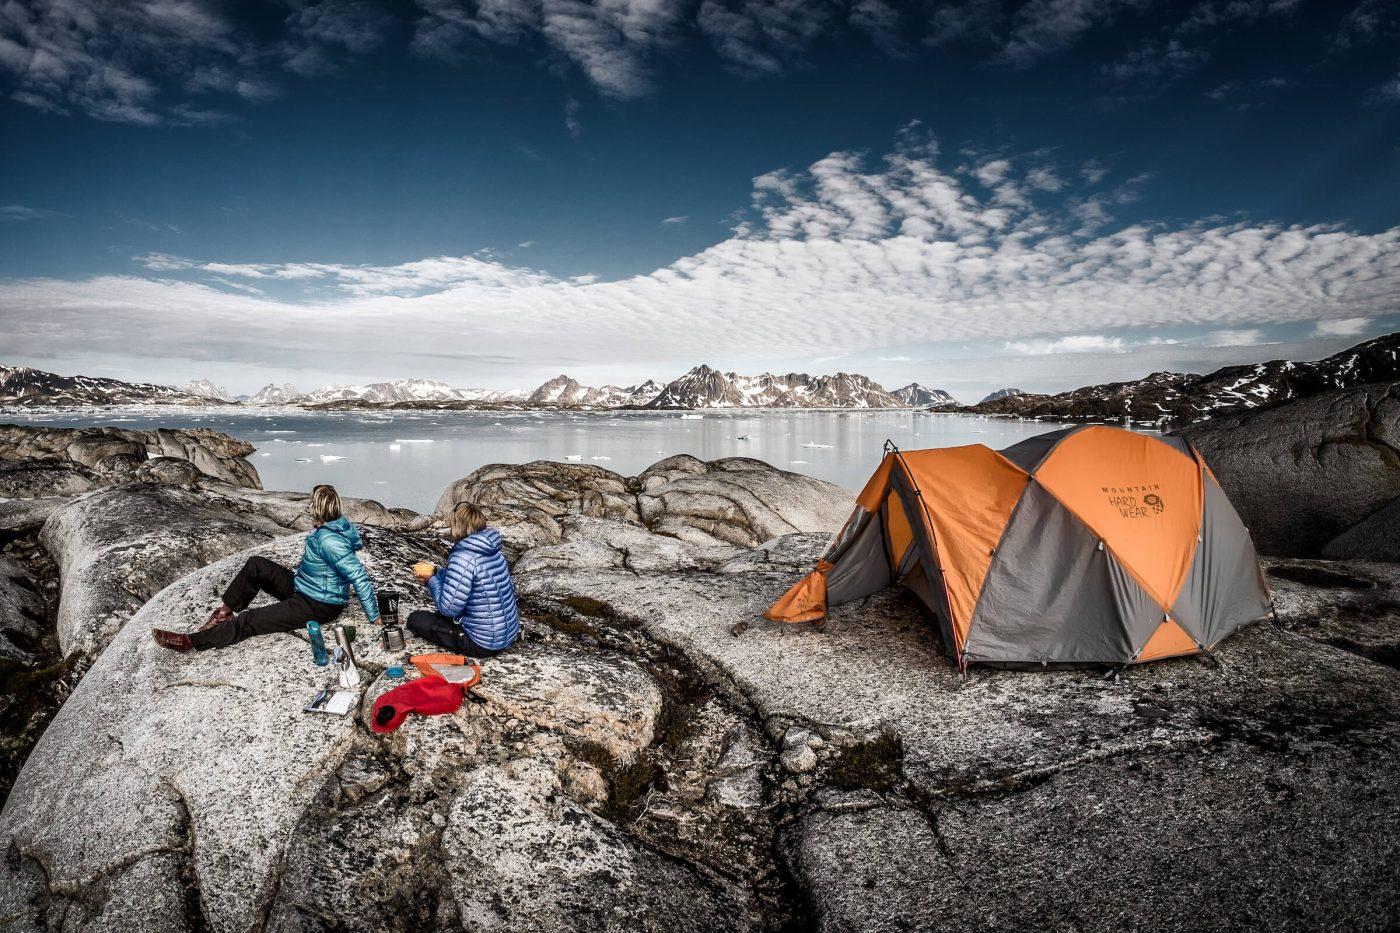 Two hikers enjoying the view from Qernertivartivit over Ammassalik Fjord in East Greenland. By Mads Pihl